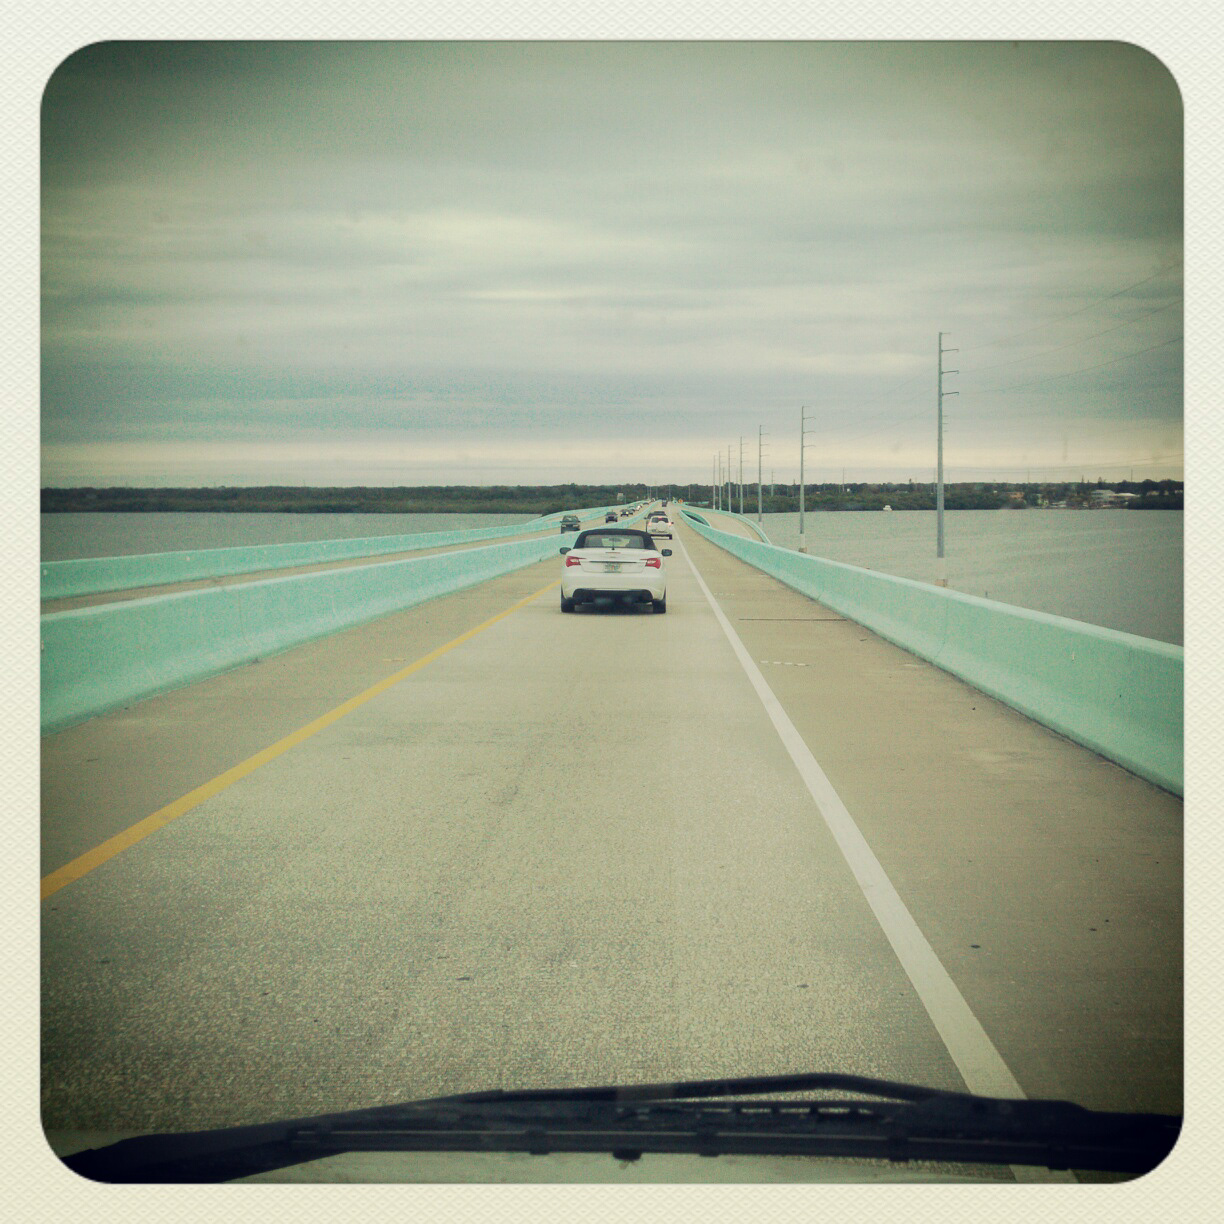 Driving to Key West_02-28-2013_001.jpg